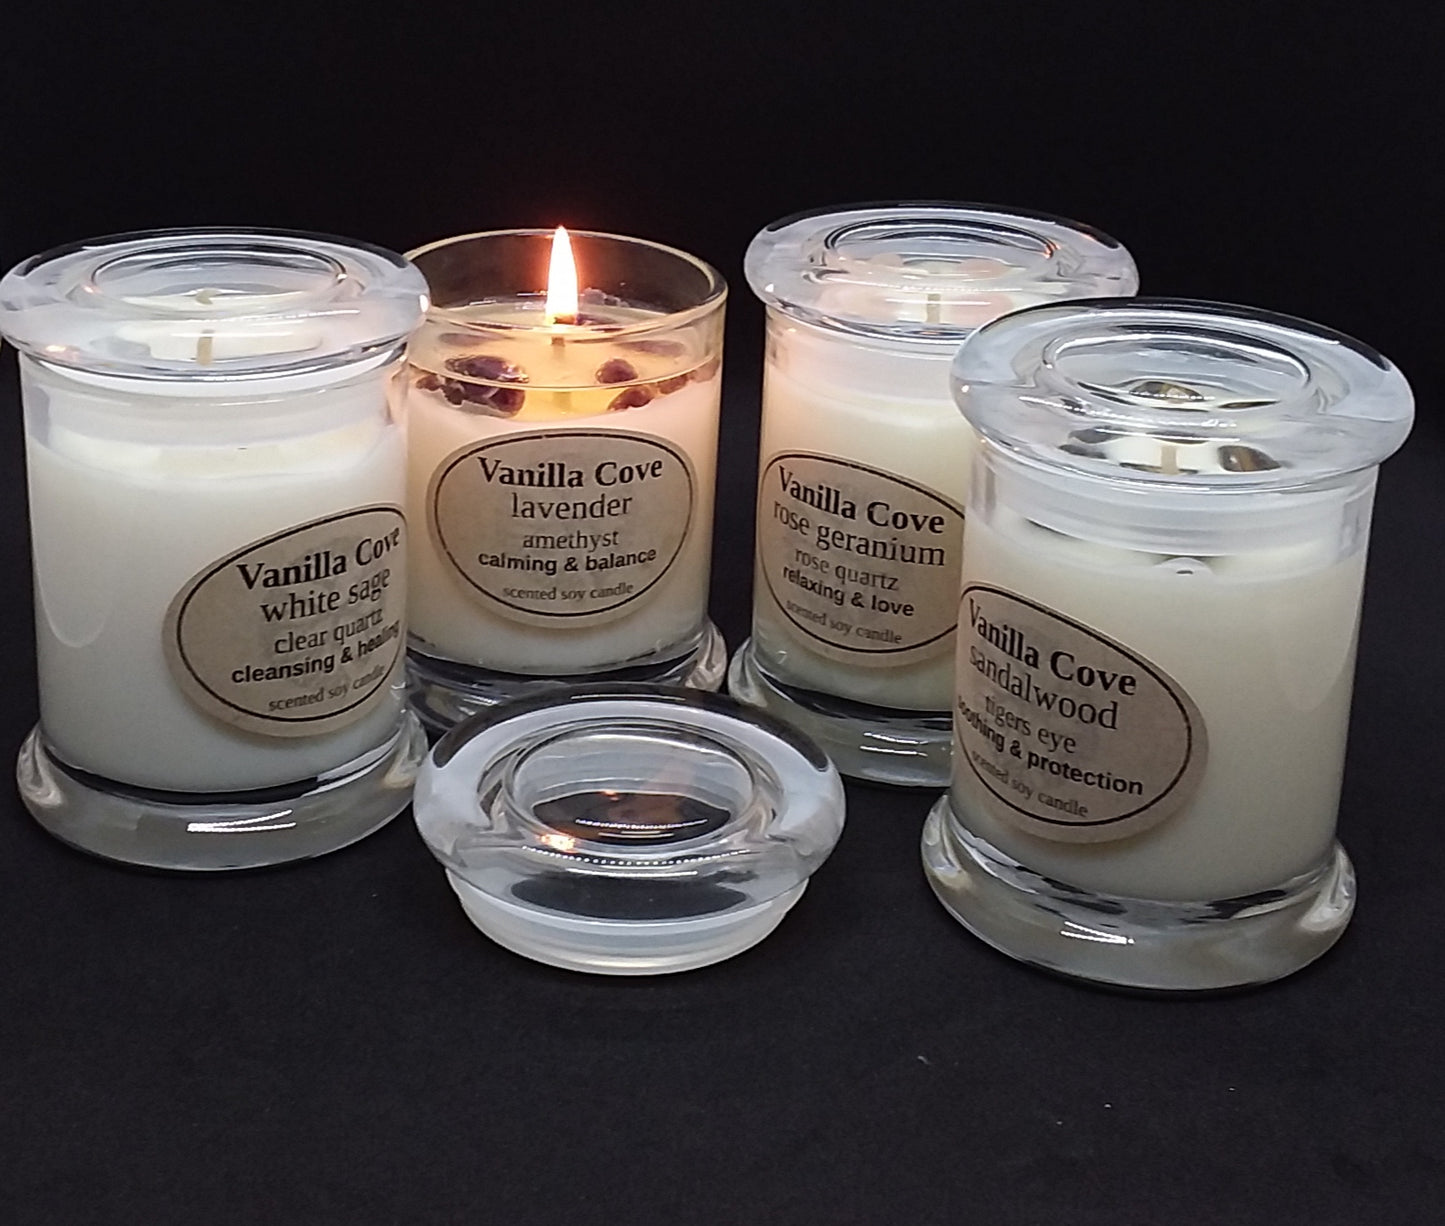 Vanilla Cove Crystal Candle range showing four candles in this range, White Sage and Clear Quartz, Lavender and Amethyst, Rose Geranium and Rose Quartz, Sandalwood and Tigers Eye